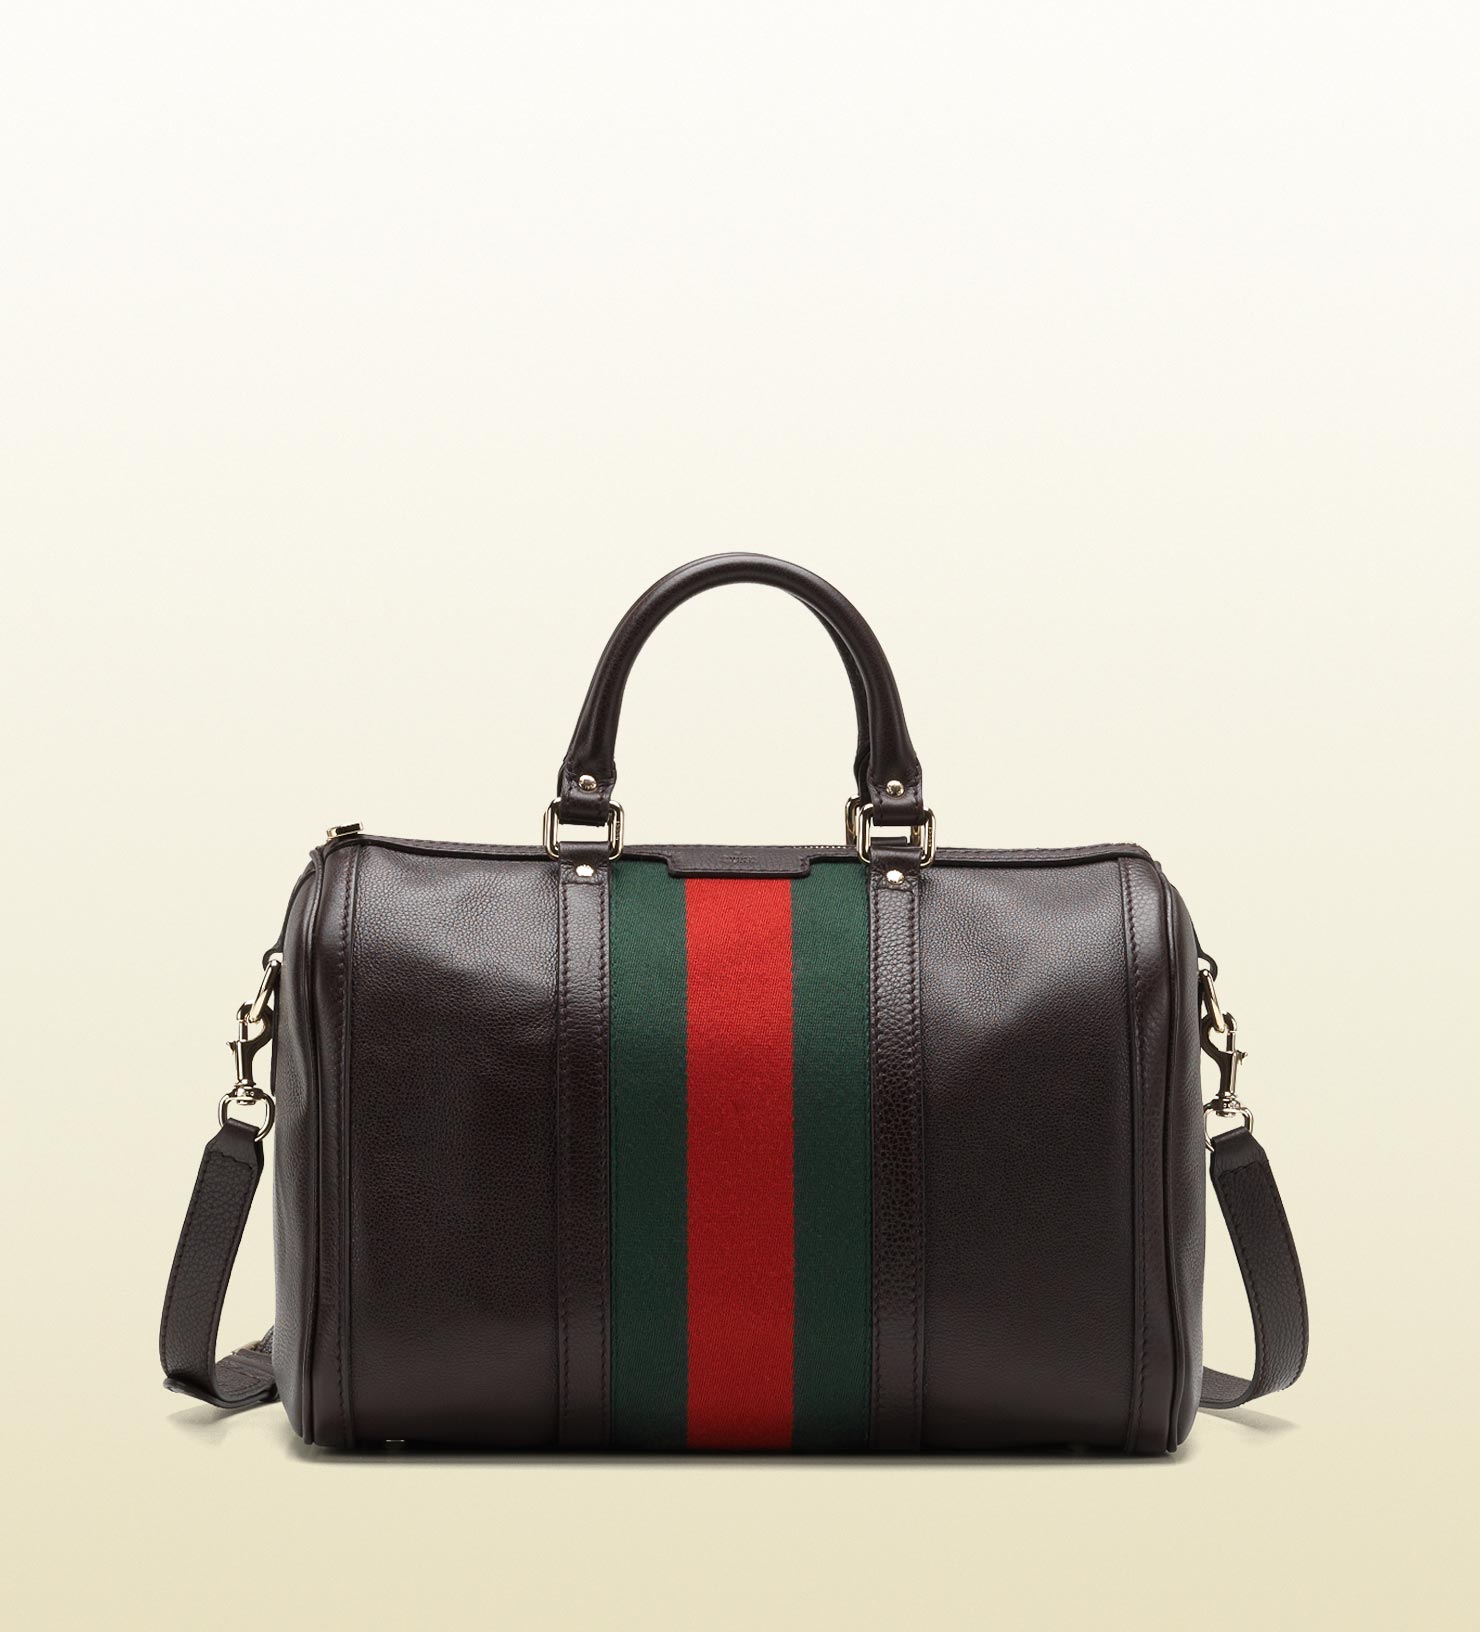 Gucci Vintage Web Leather Boston Bag in Brown - Lyst